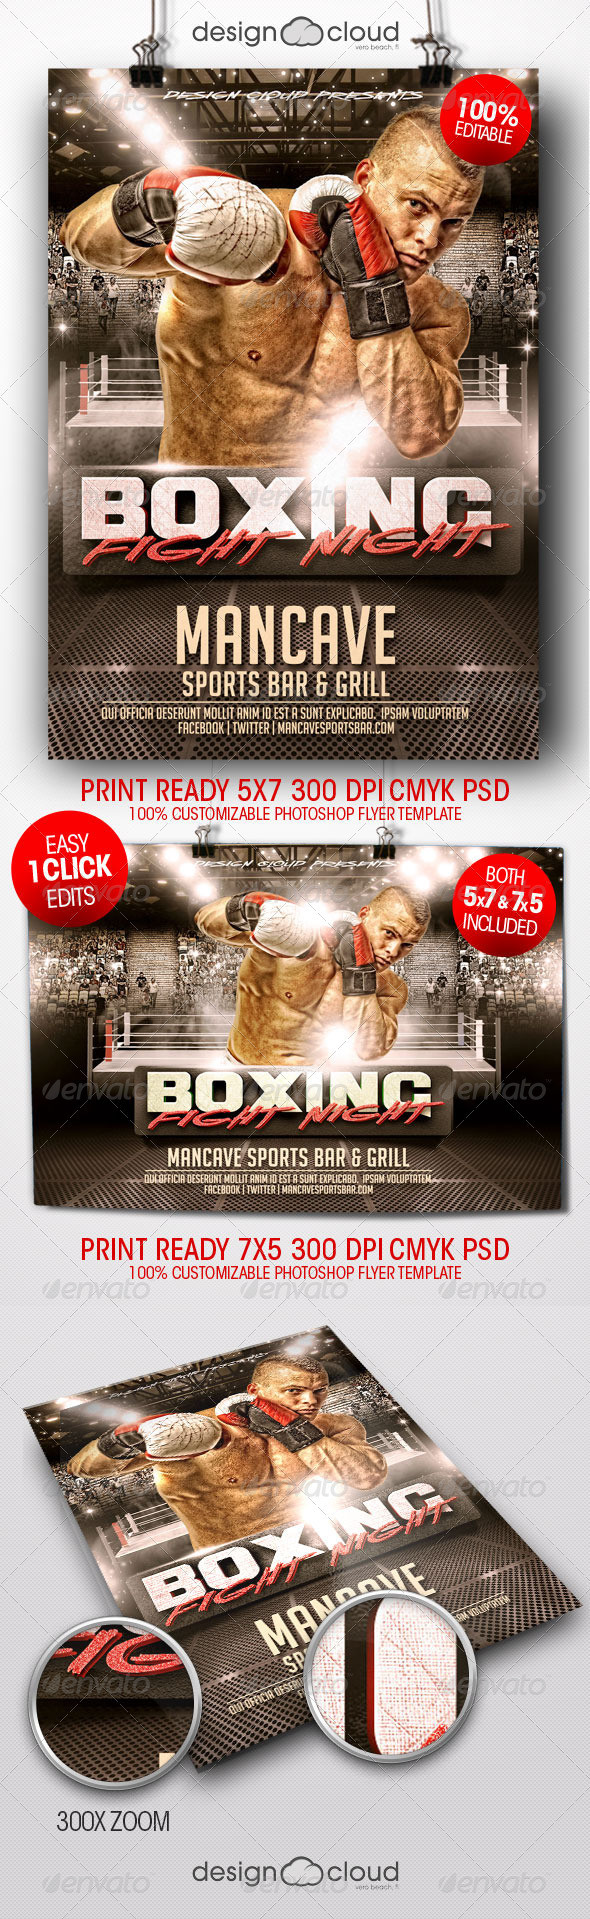 Preview boxing fight night flyer template lg